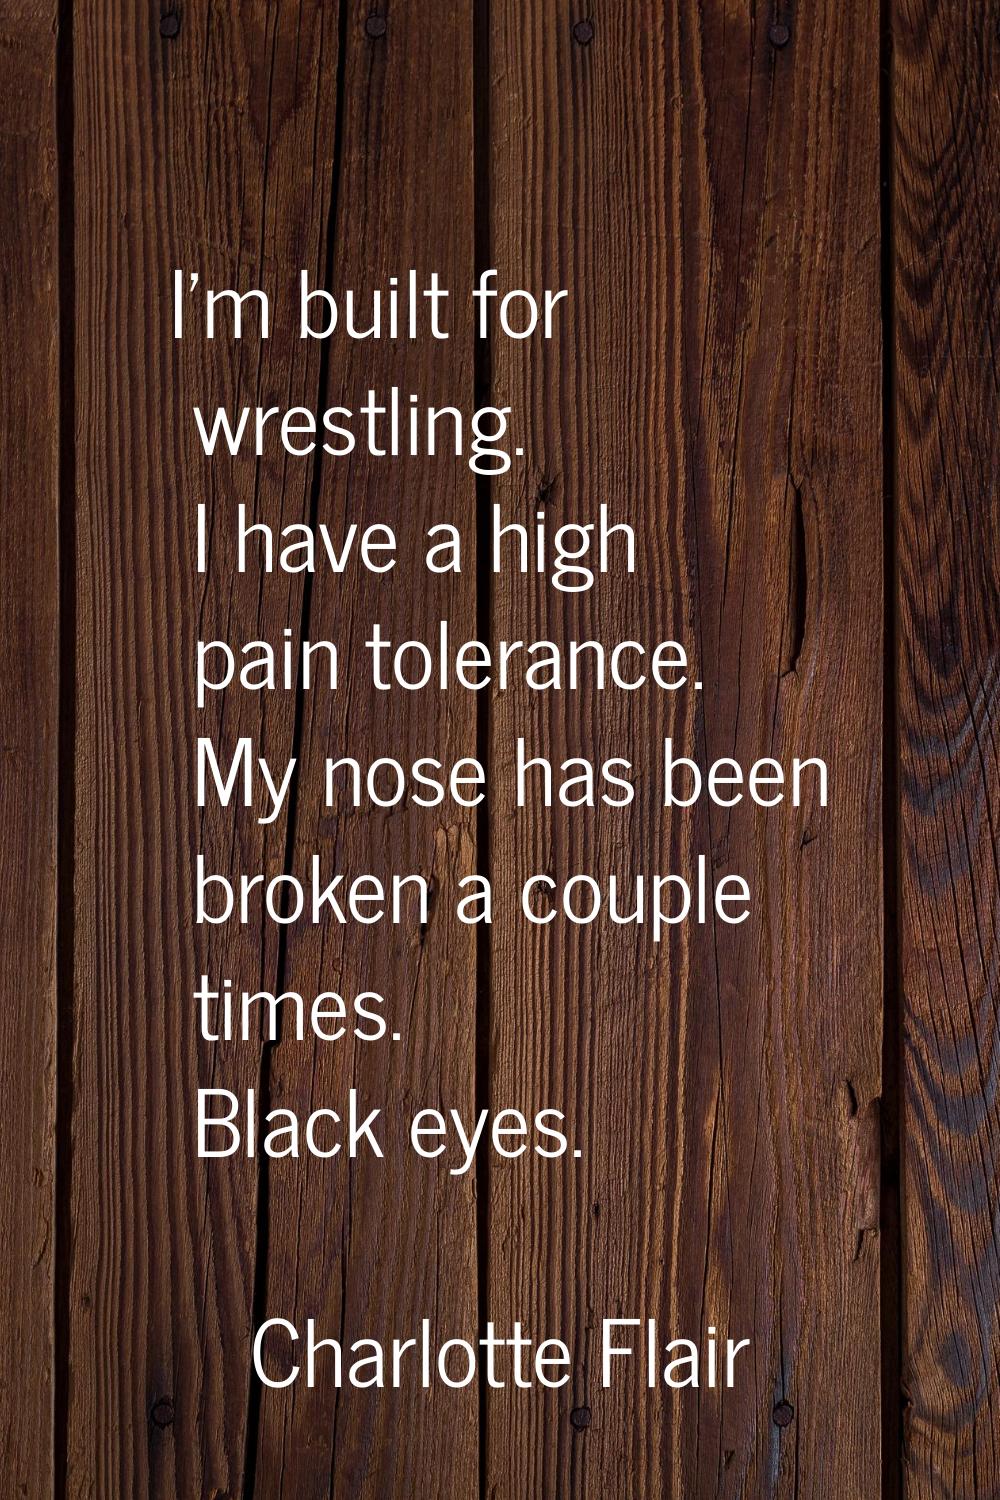 I'm built for wrestling. I have a high pain tolerance. My nose has been broken a couple times. Blac